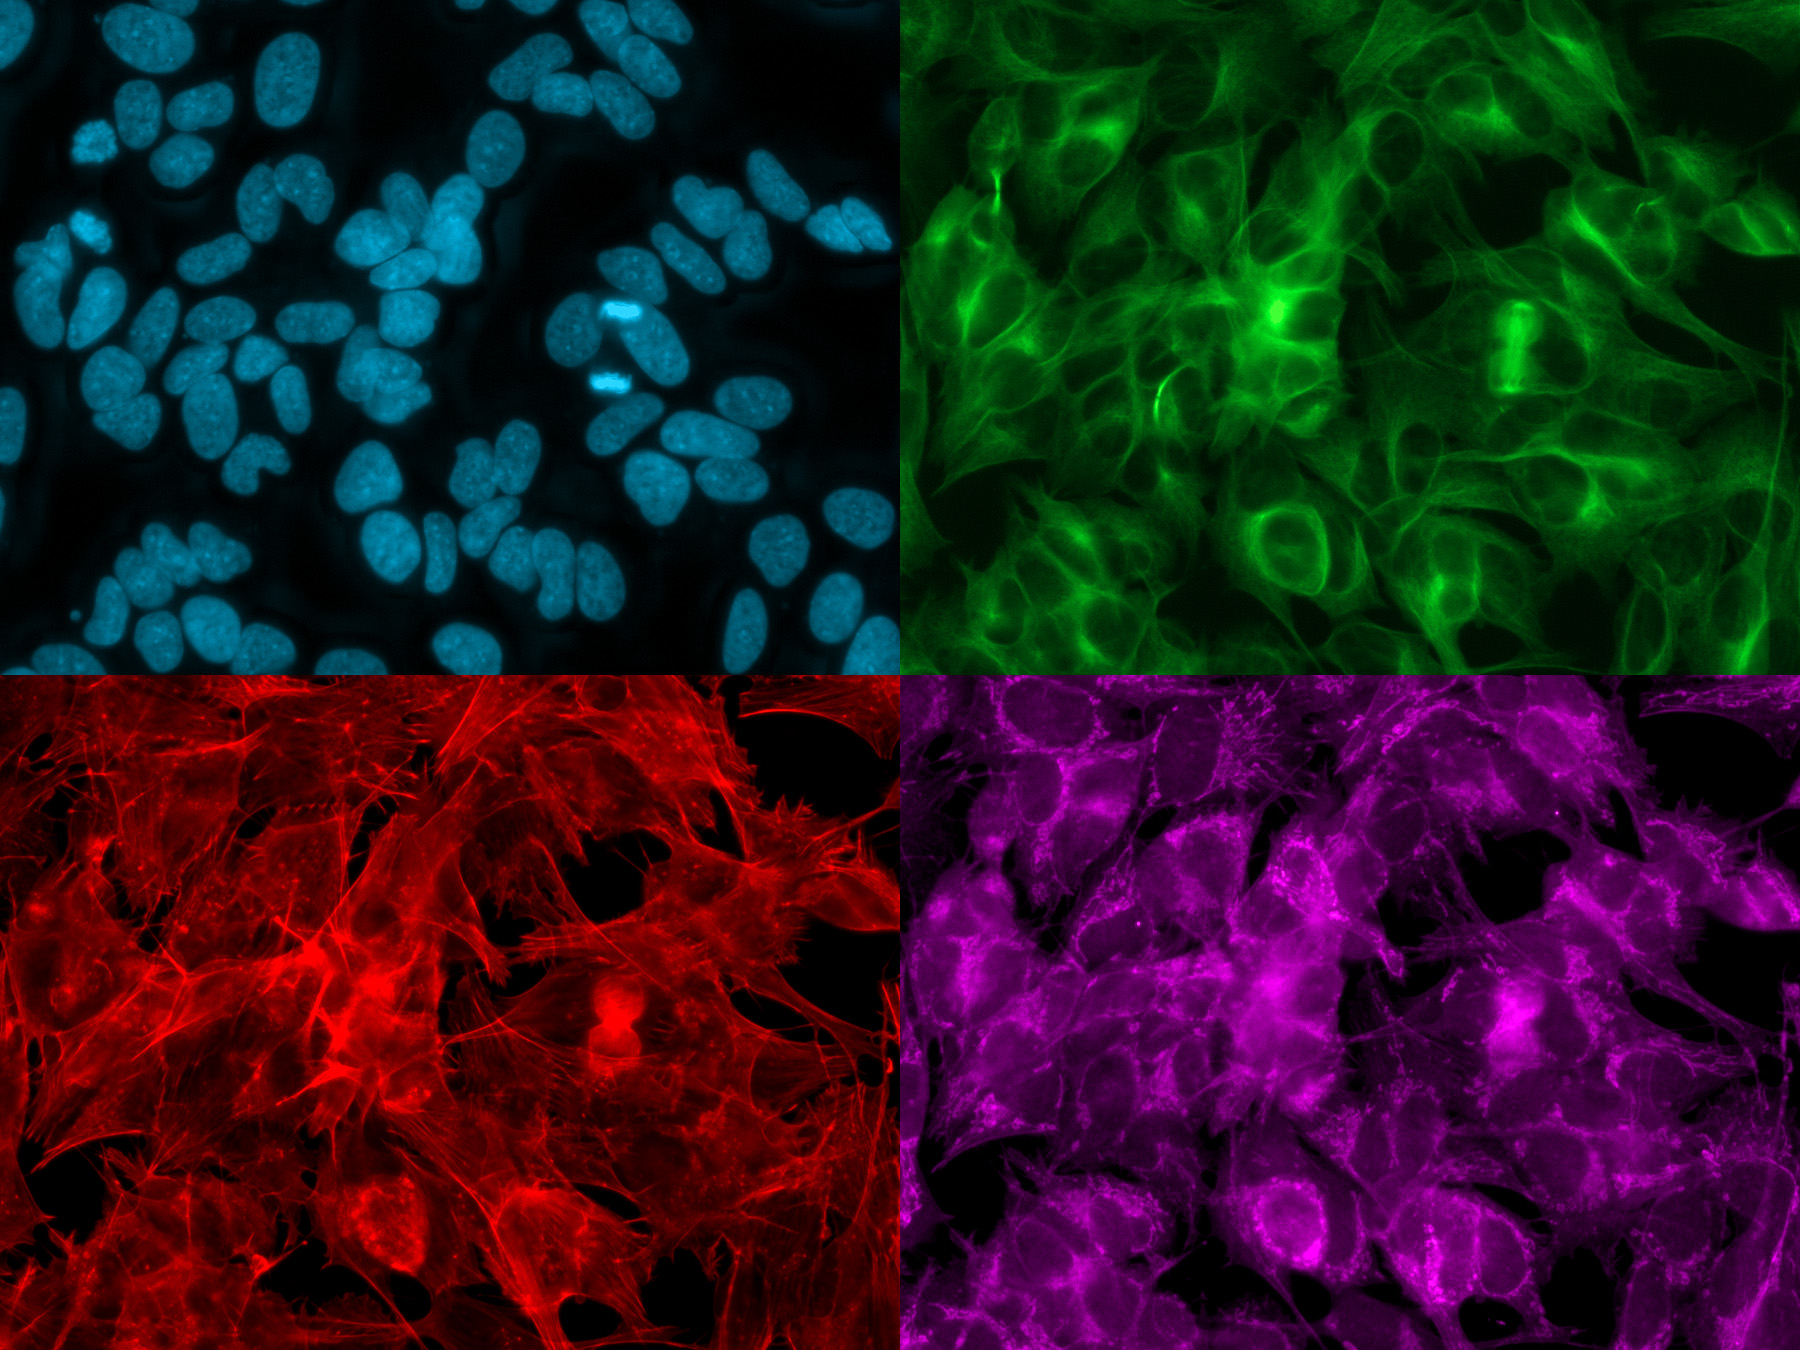 SH-SY5Y cells cultured on a 384 micro-well plate; multichannel image at a single position